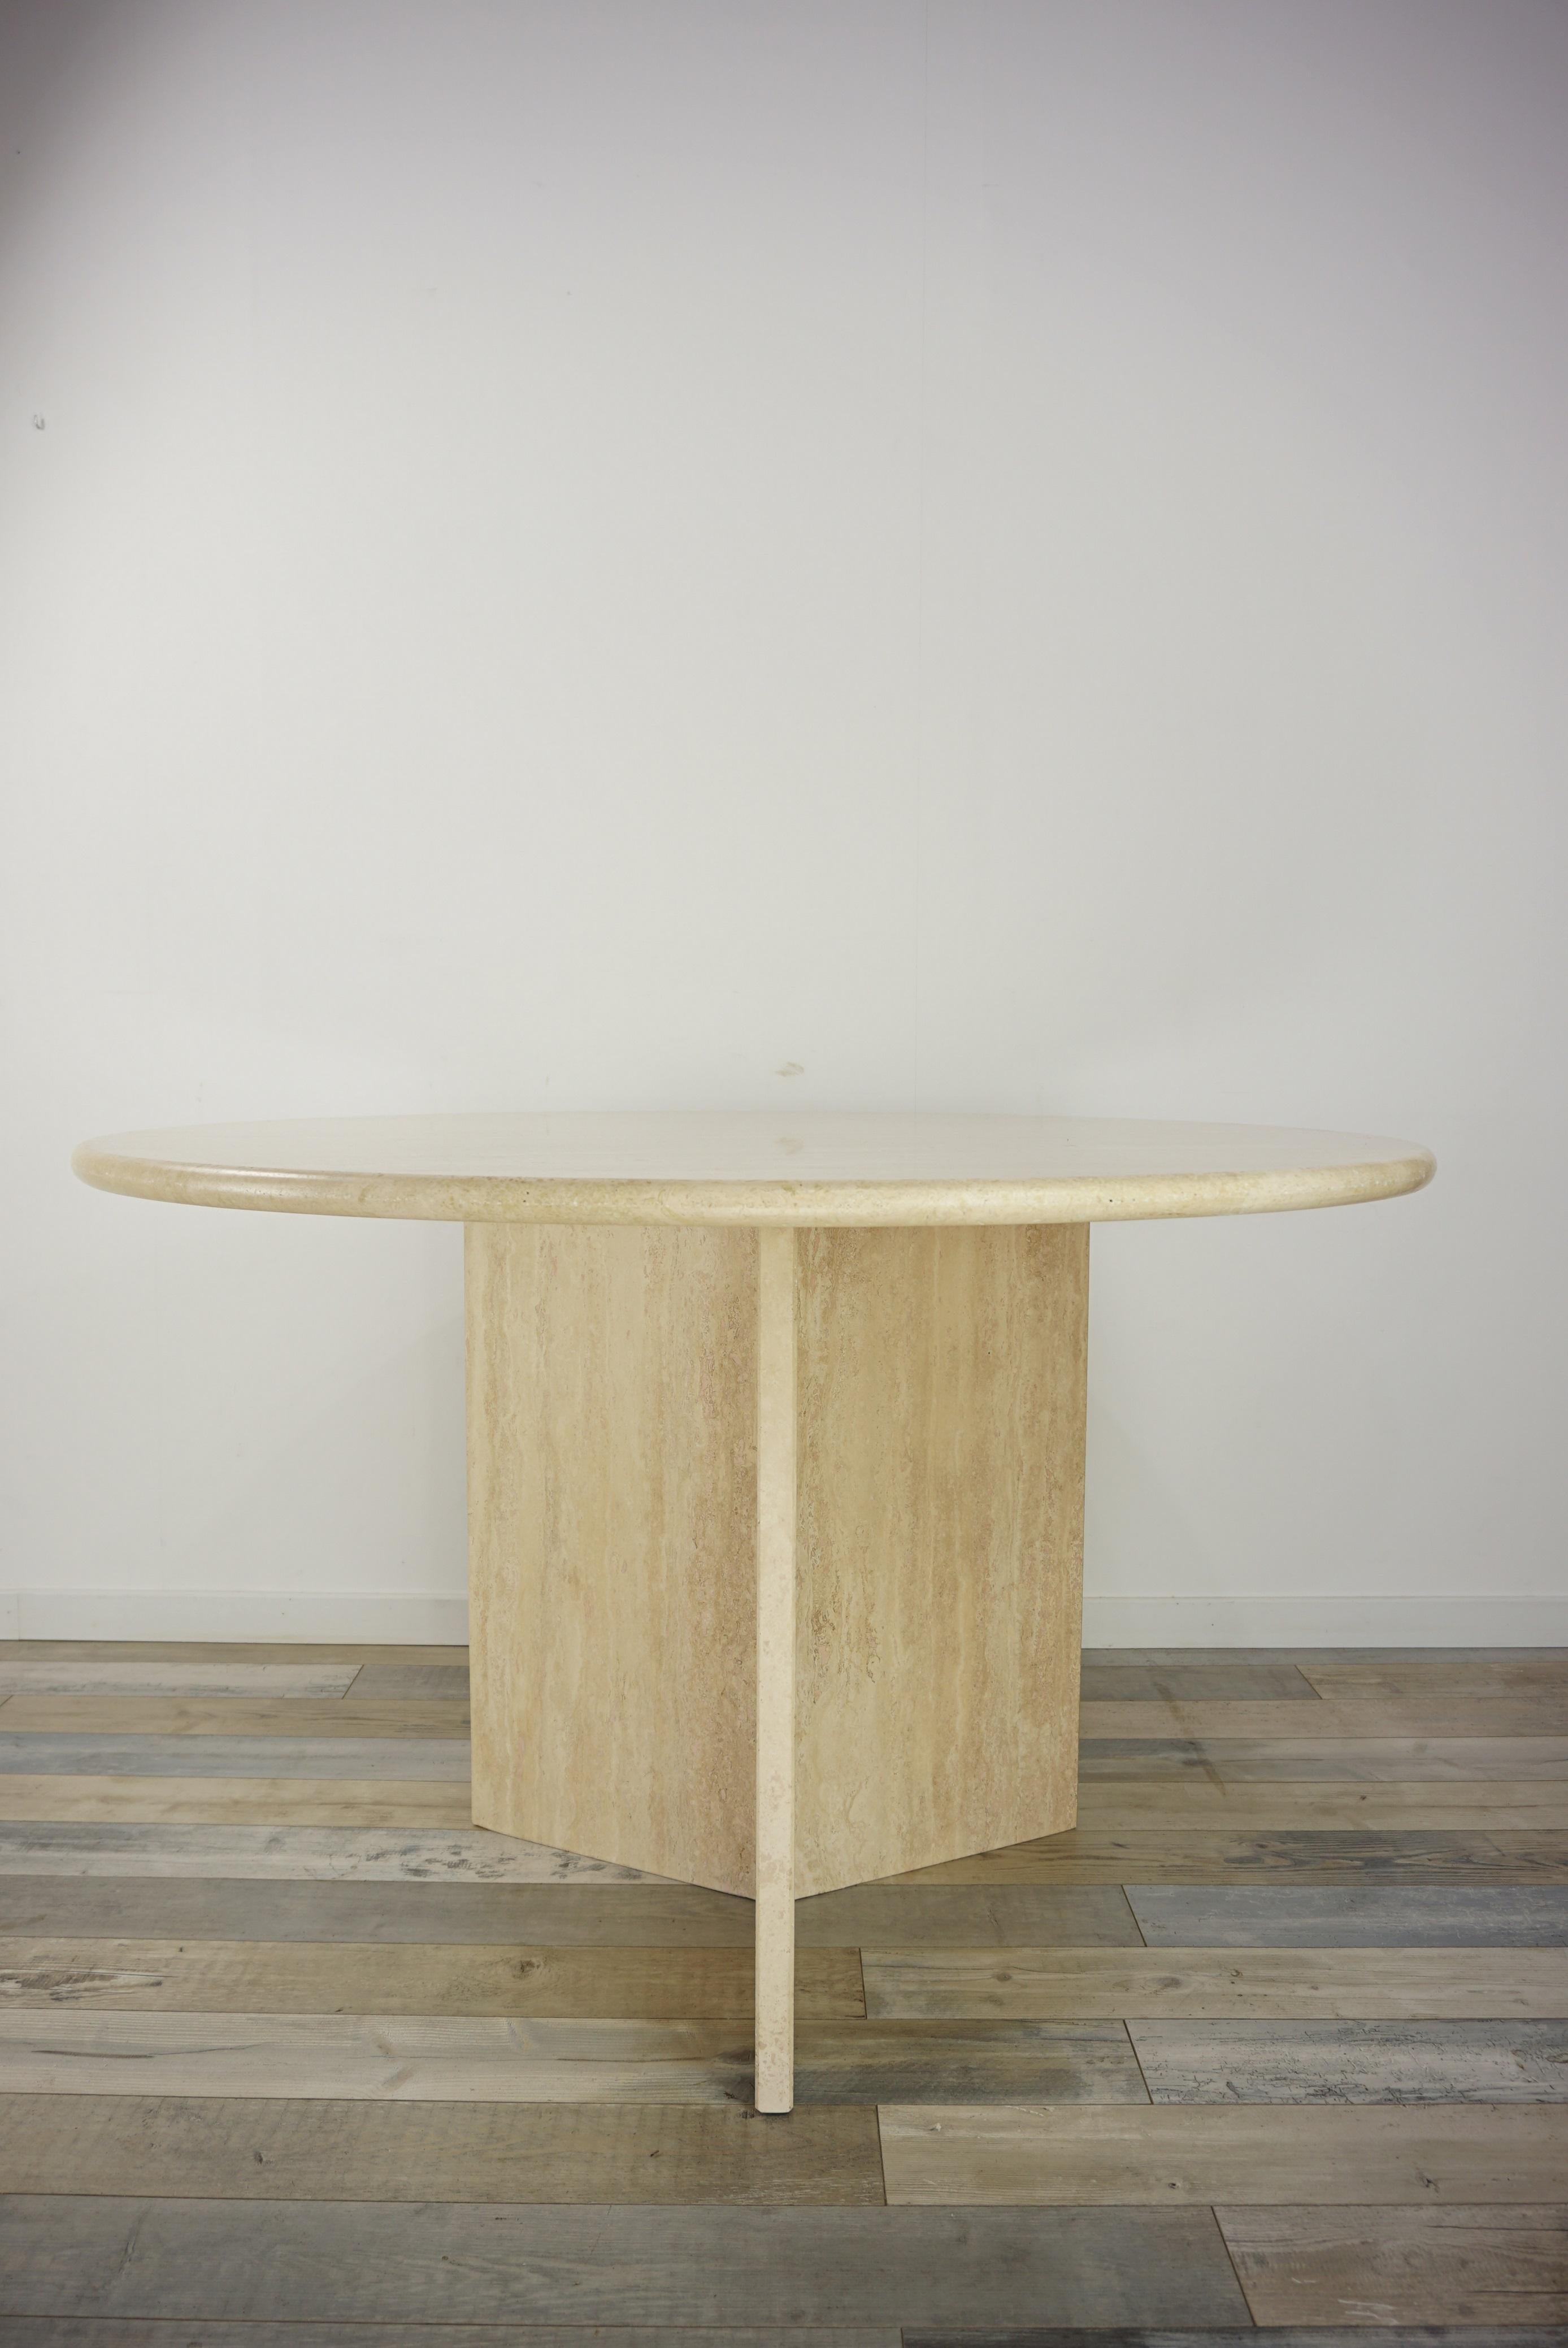 Italian design round pedestal table consisting of a graphic travertine and triangular foot with a round travertine tray.